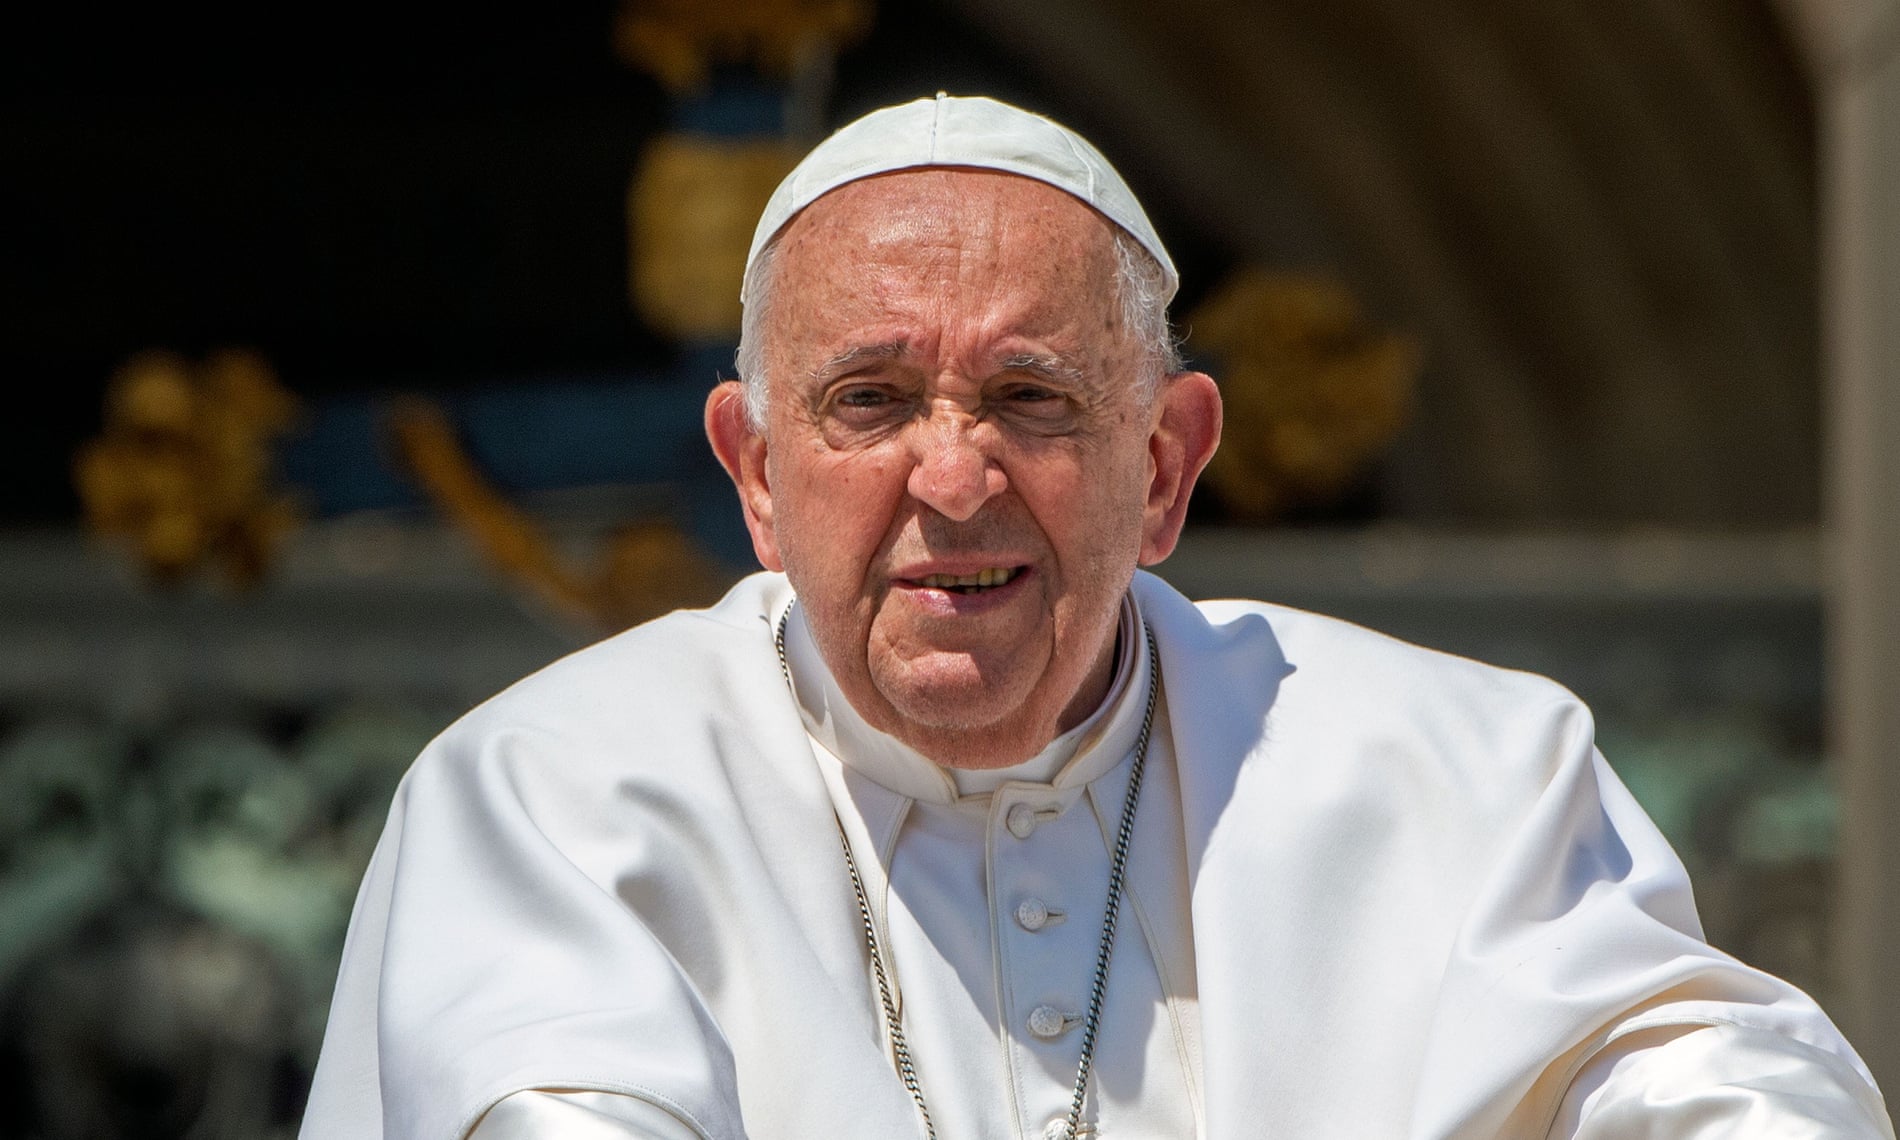 Pope Francis — boss of leading hate group against LGBTQs and women — now falsely claims that “gossip is a women’s thing!” The shocking statement comes shortly after the pope used a derogatory slur about gay people  🚨